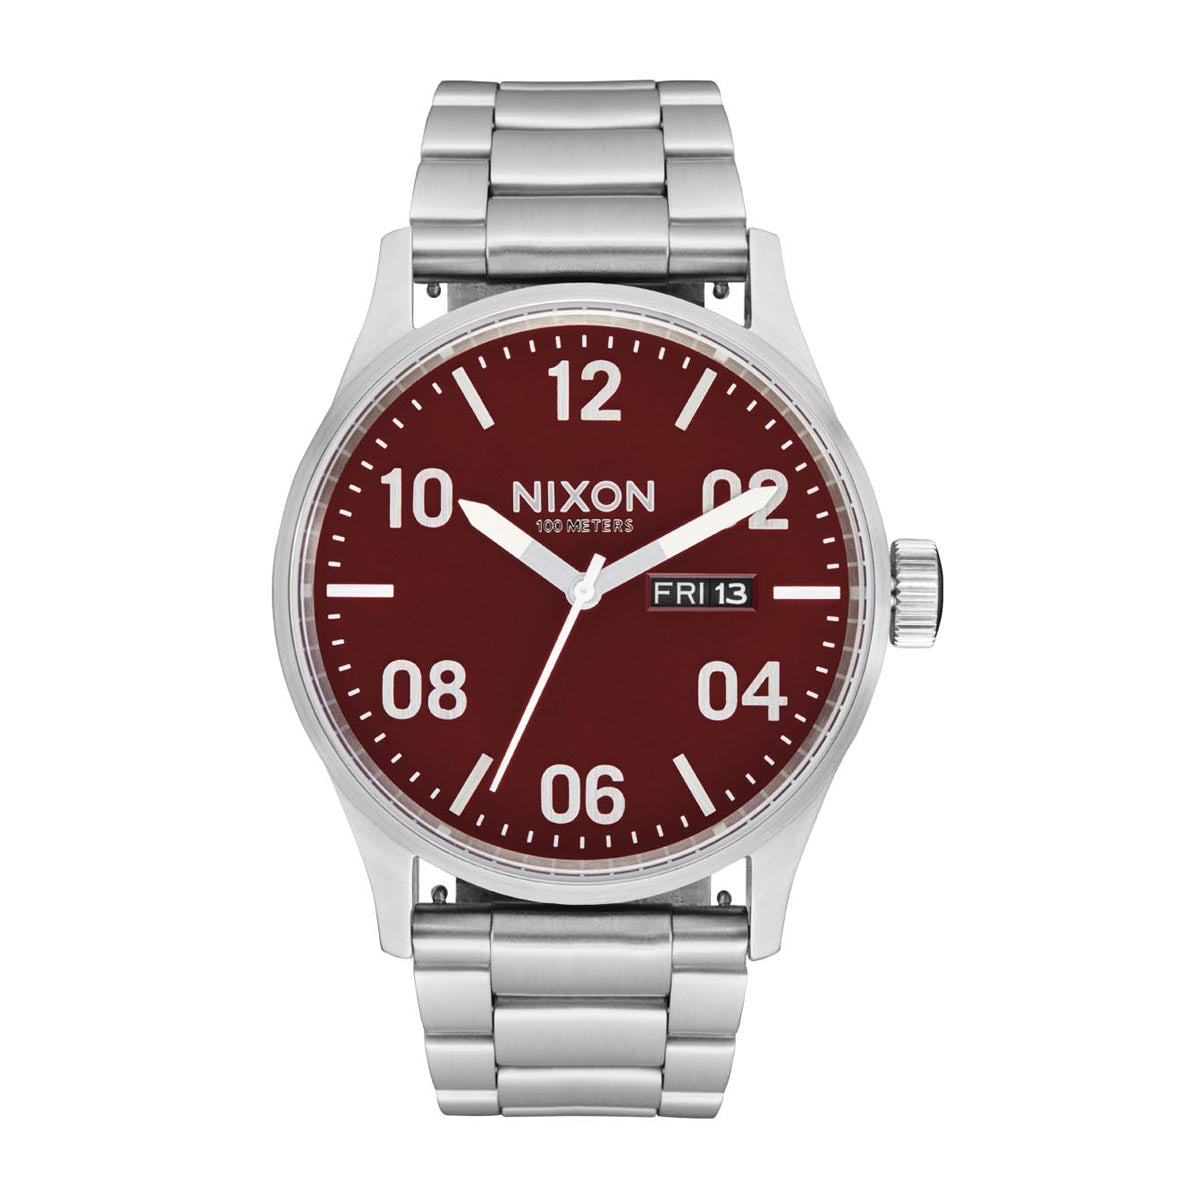 Nixon Sentry Stainless Steel Watch - Silver/Cranberry image 1